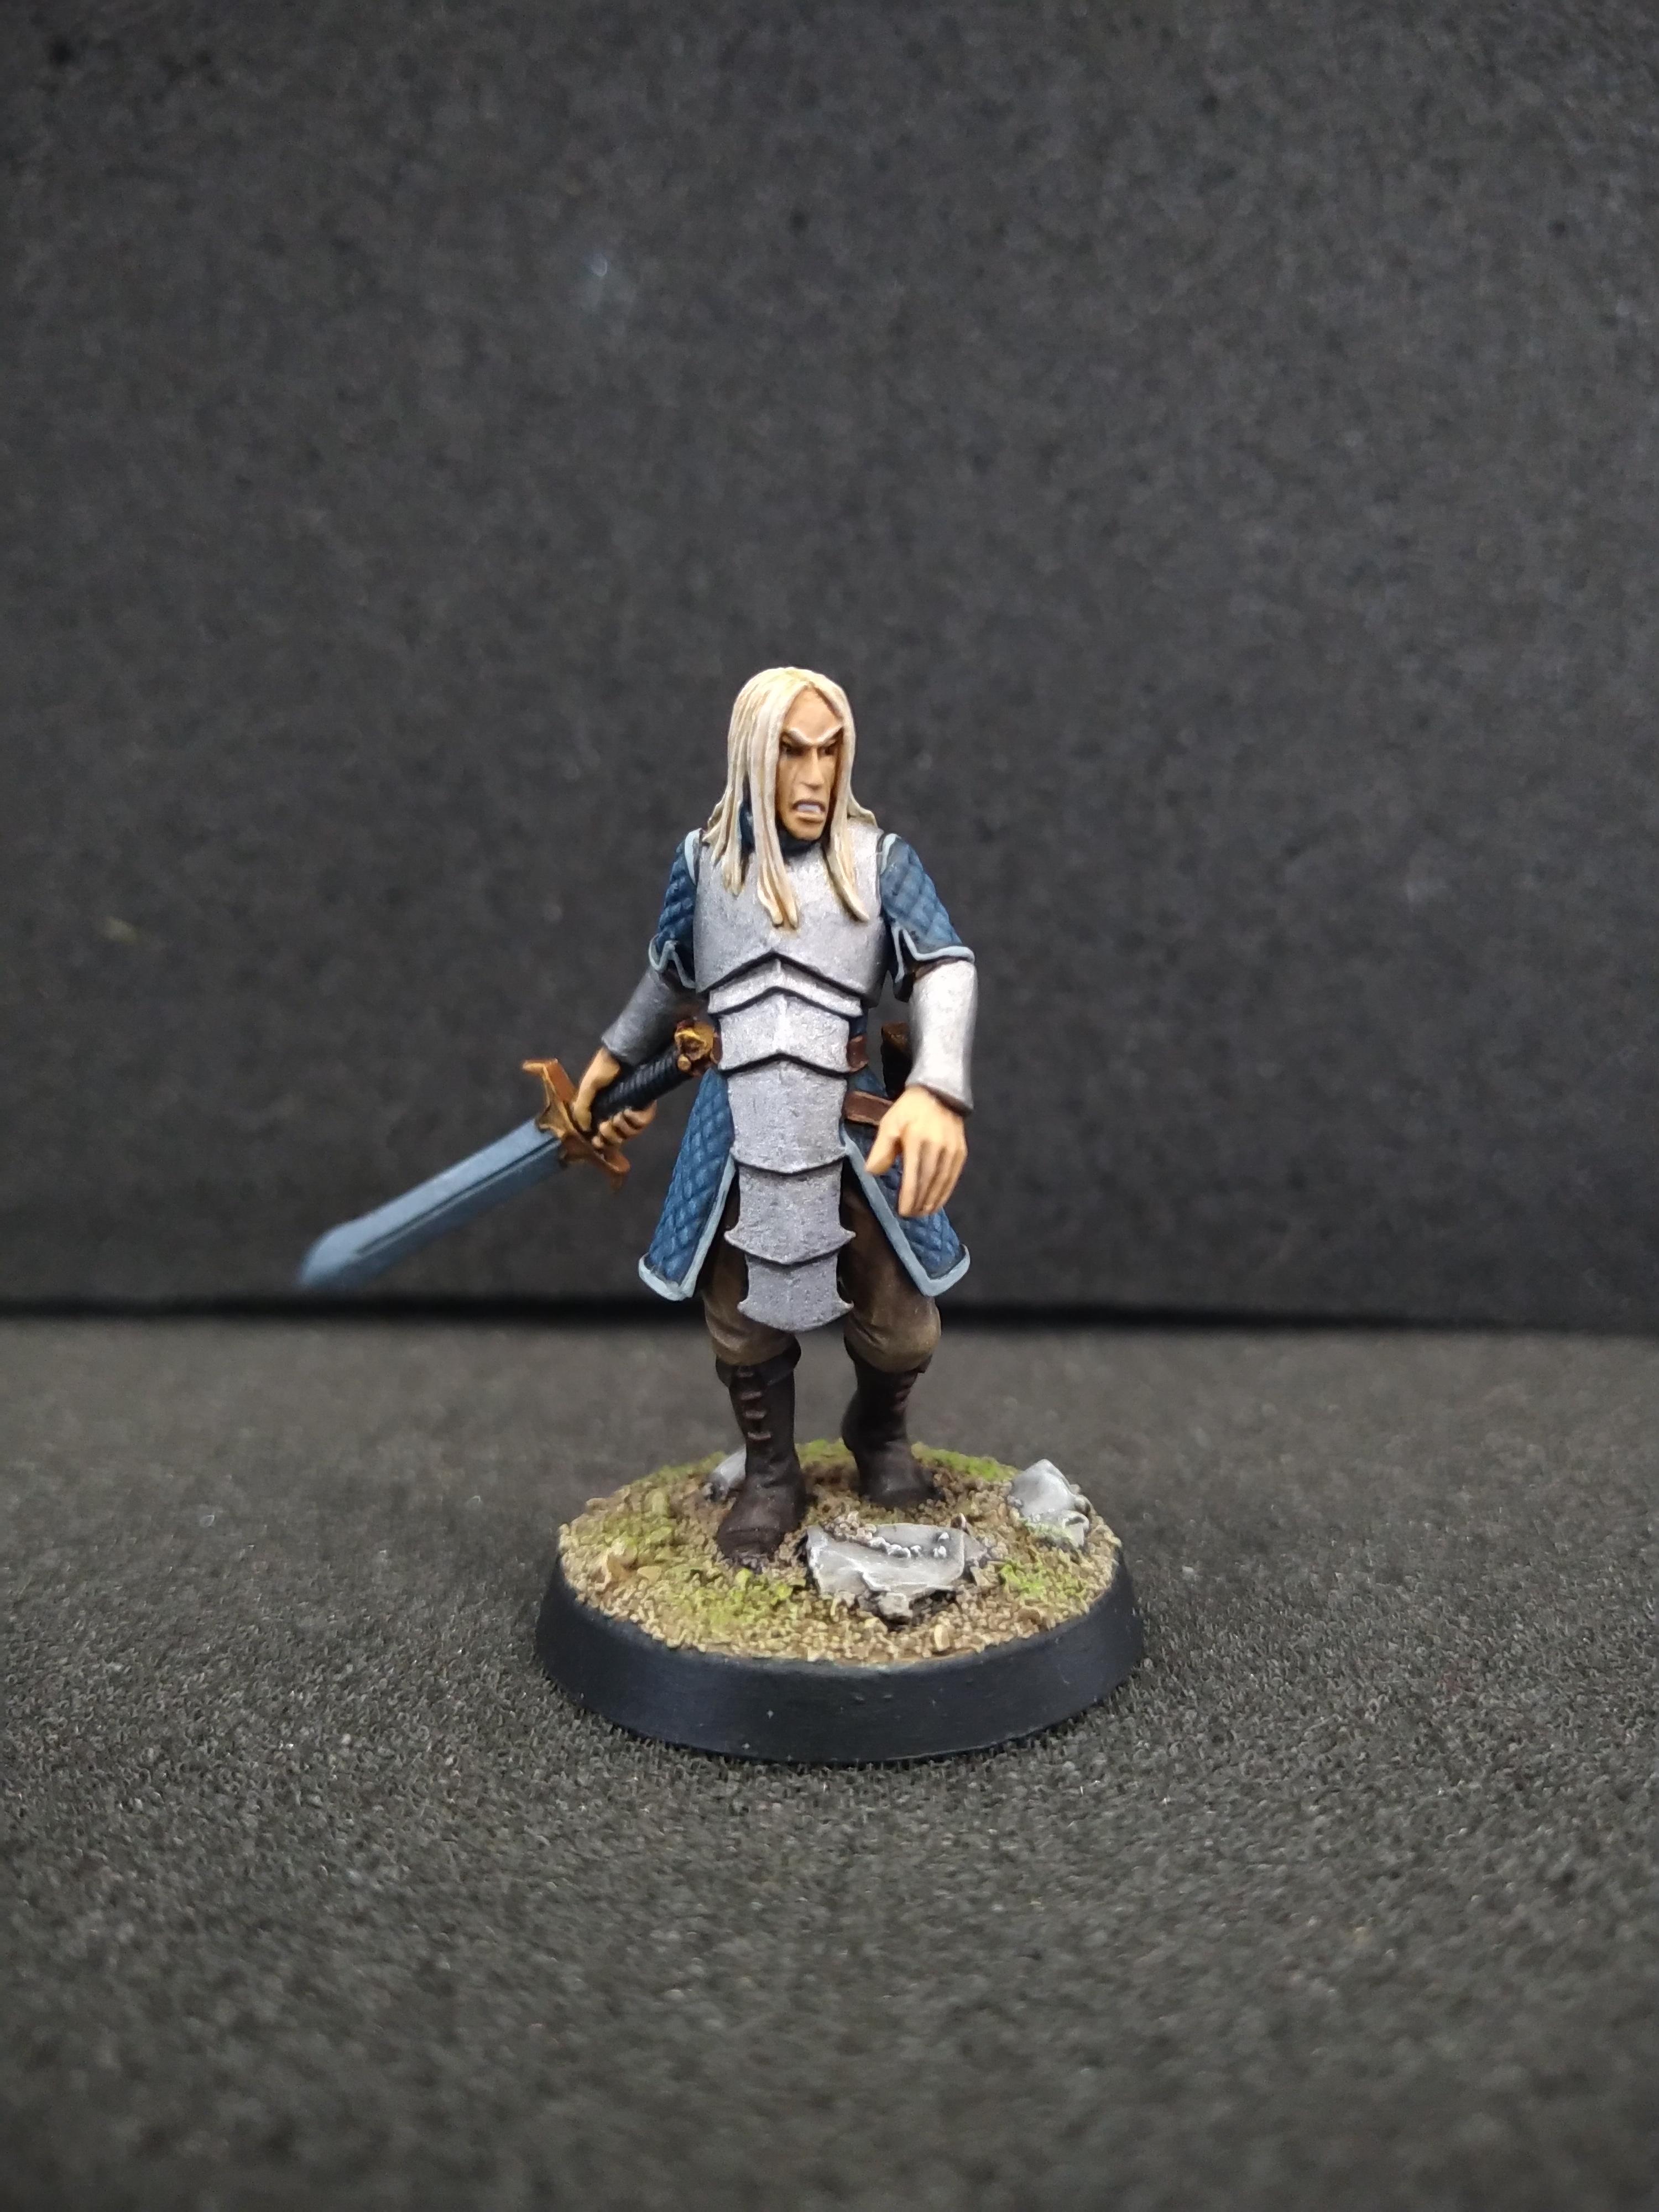 Ceril, Free, Hassle, Hasslefree, Miniatures